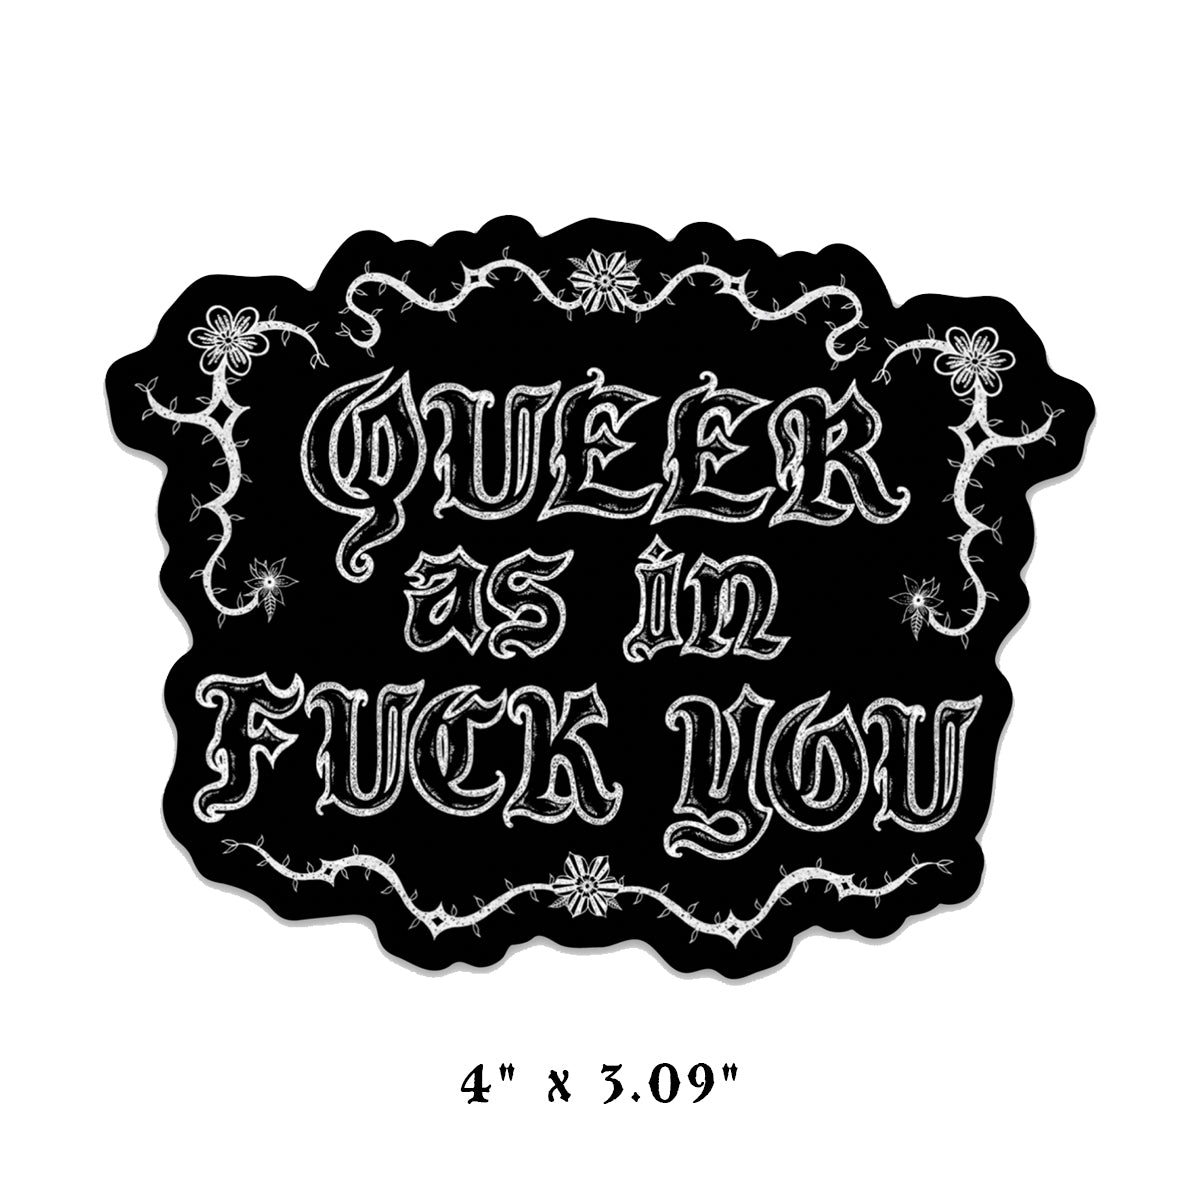 Queer As In Fuck You - T-Shirt